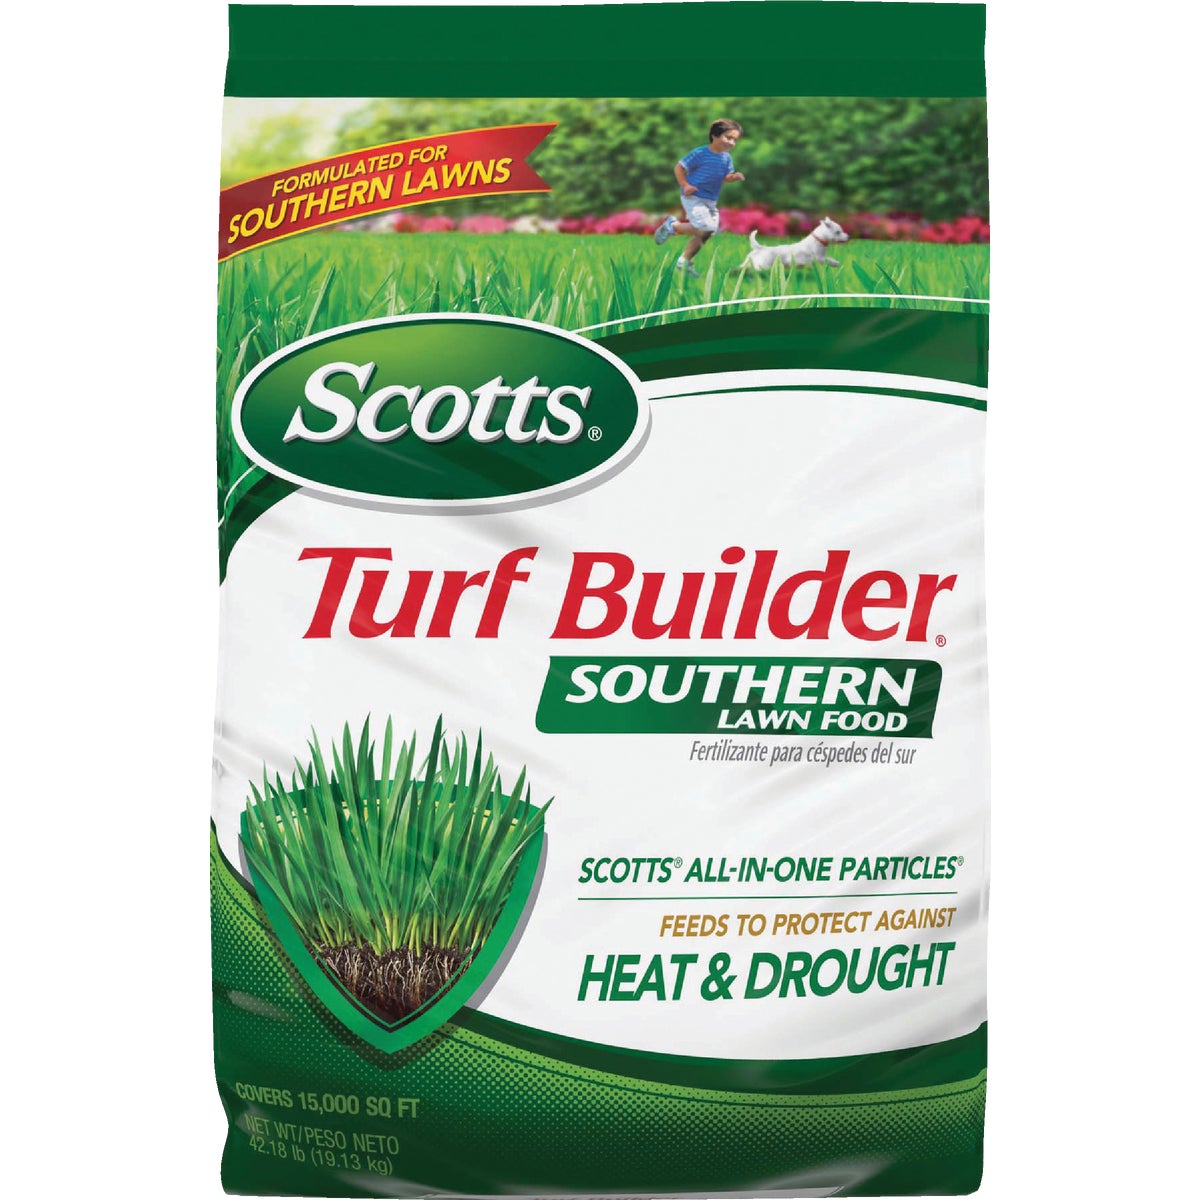 Scotts Turf Builder 15,000 Sq. Ft. Southern Lawn Food